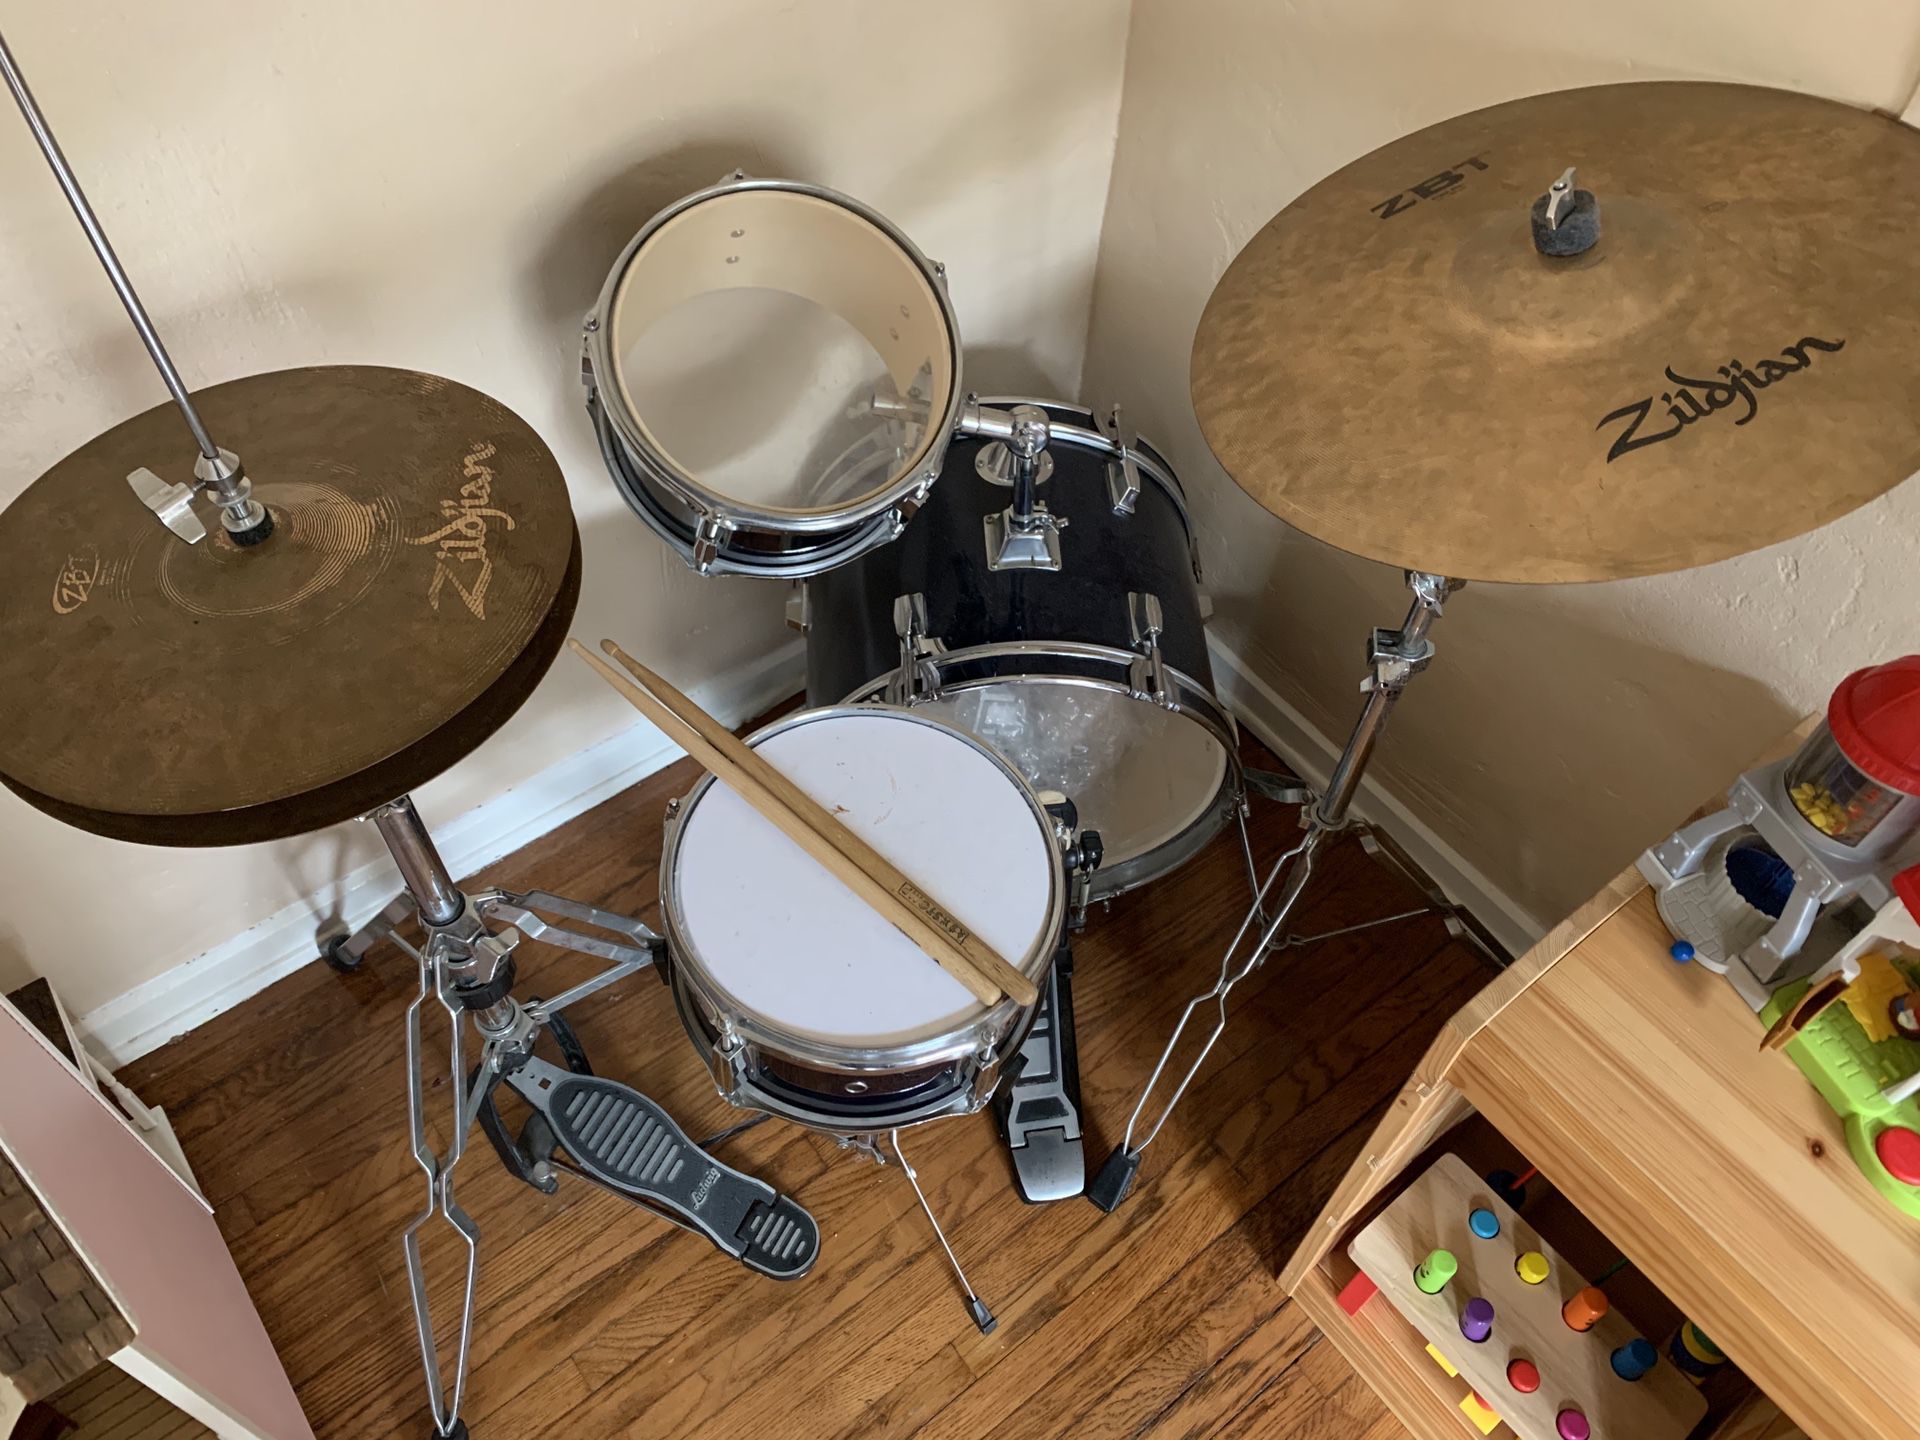 Kids drum set with higher quality hardware